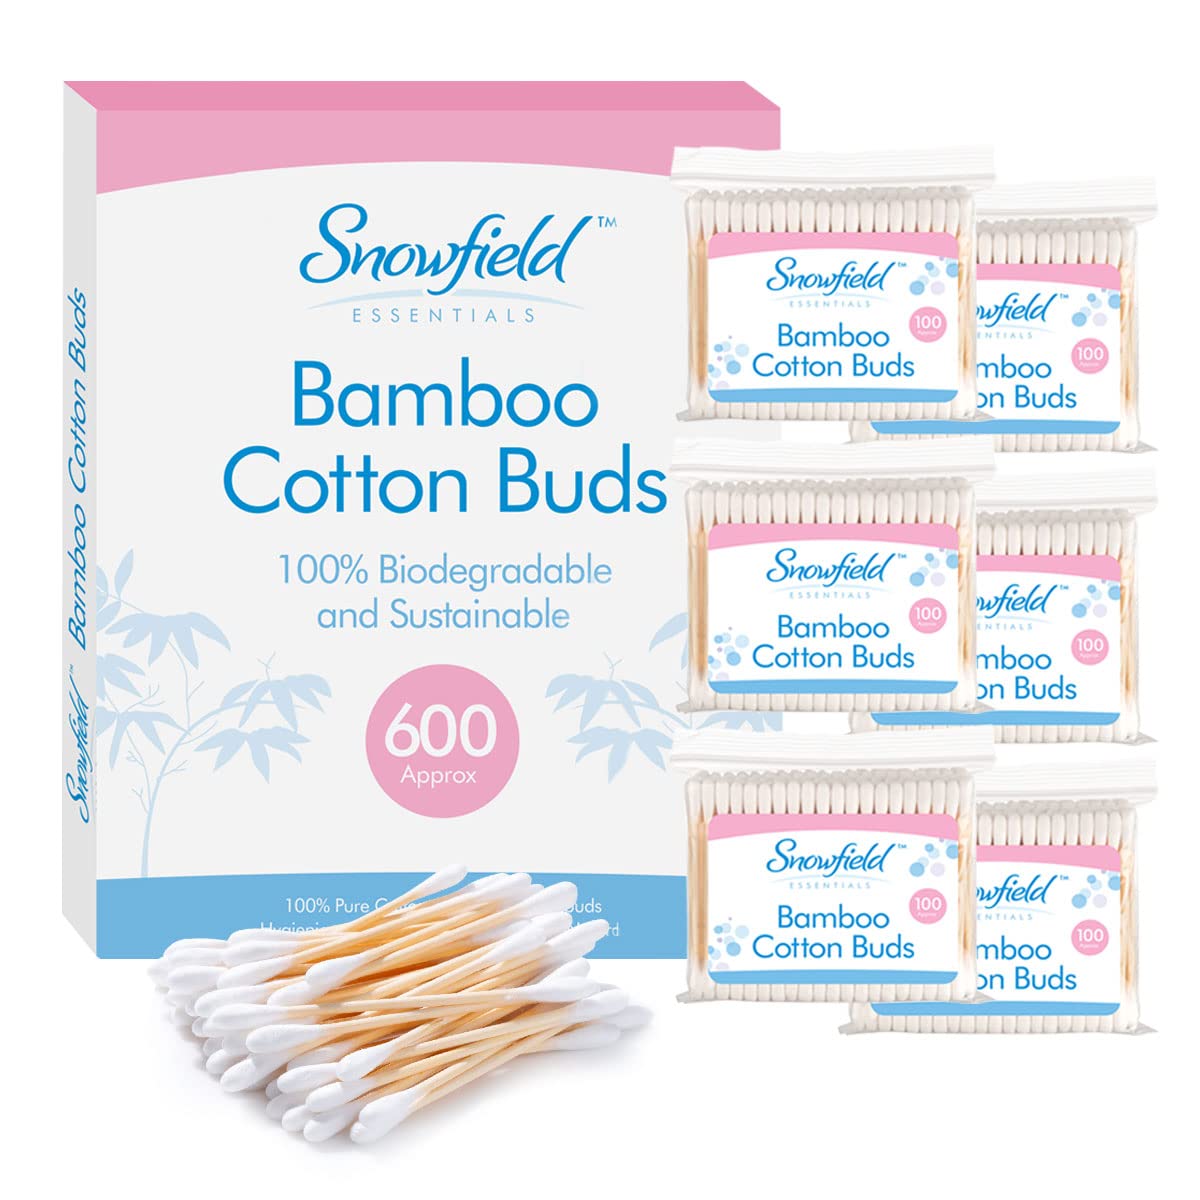 600PCS Bamboo Cotton Buds | Cotton Buds Biodegradable | Cotton Ear Buds for Ear Cleaning | Cotton Wool Buds for Makeup Application | Cotton Bud for Cotton Swabs Ear Sticks